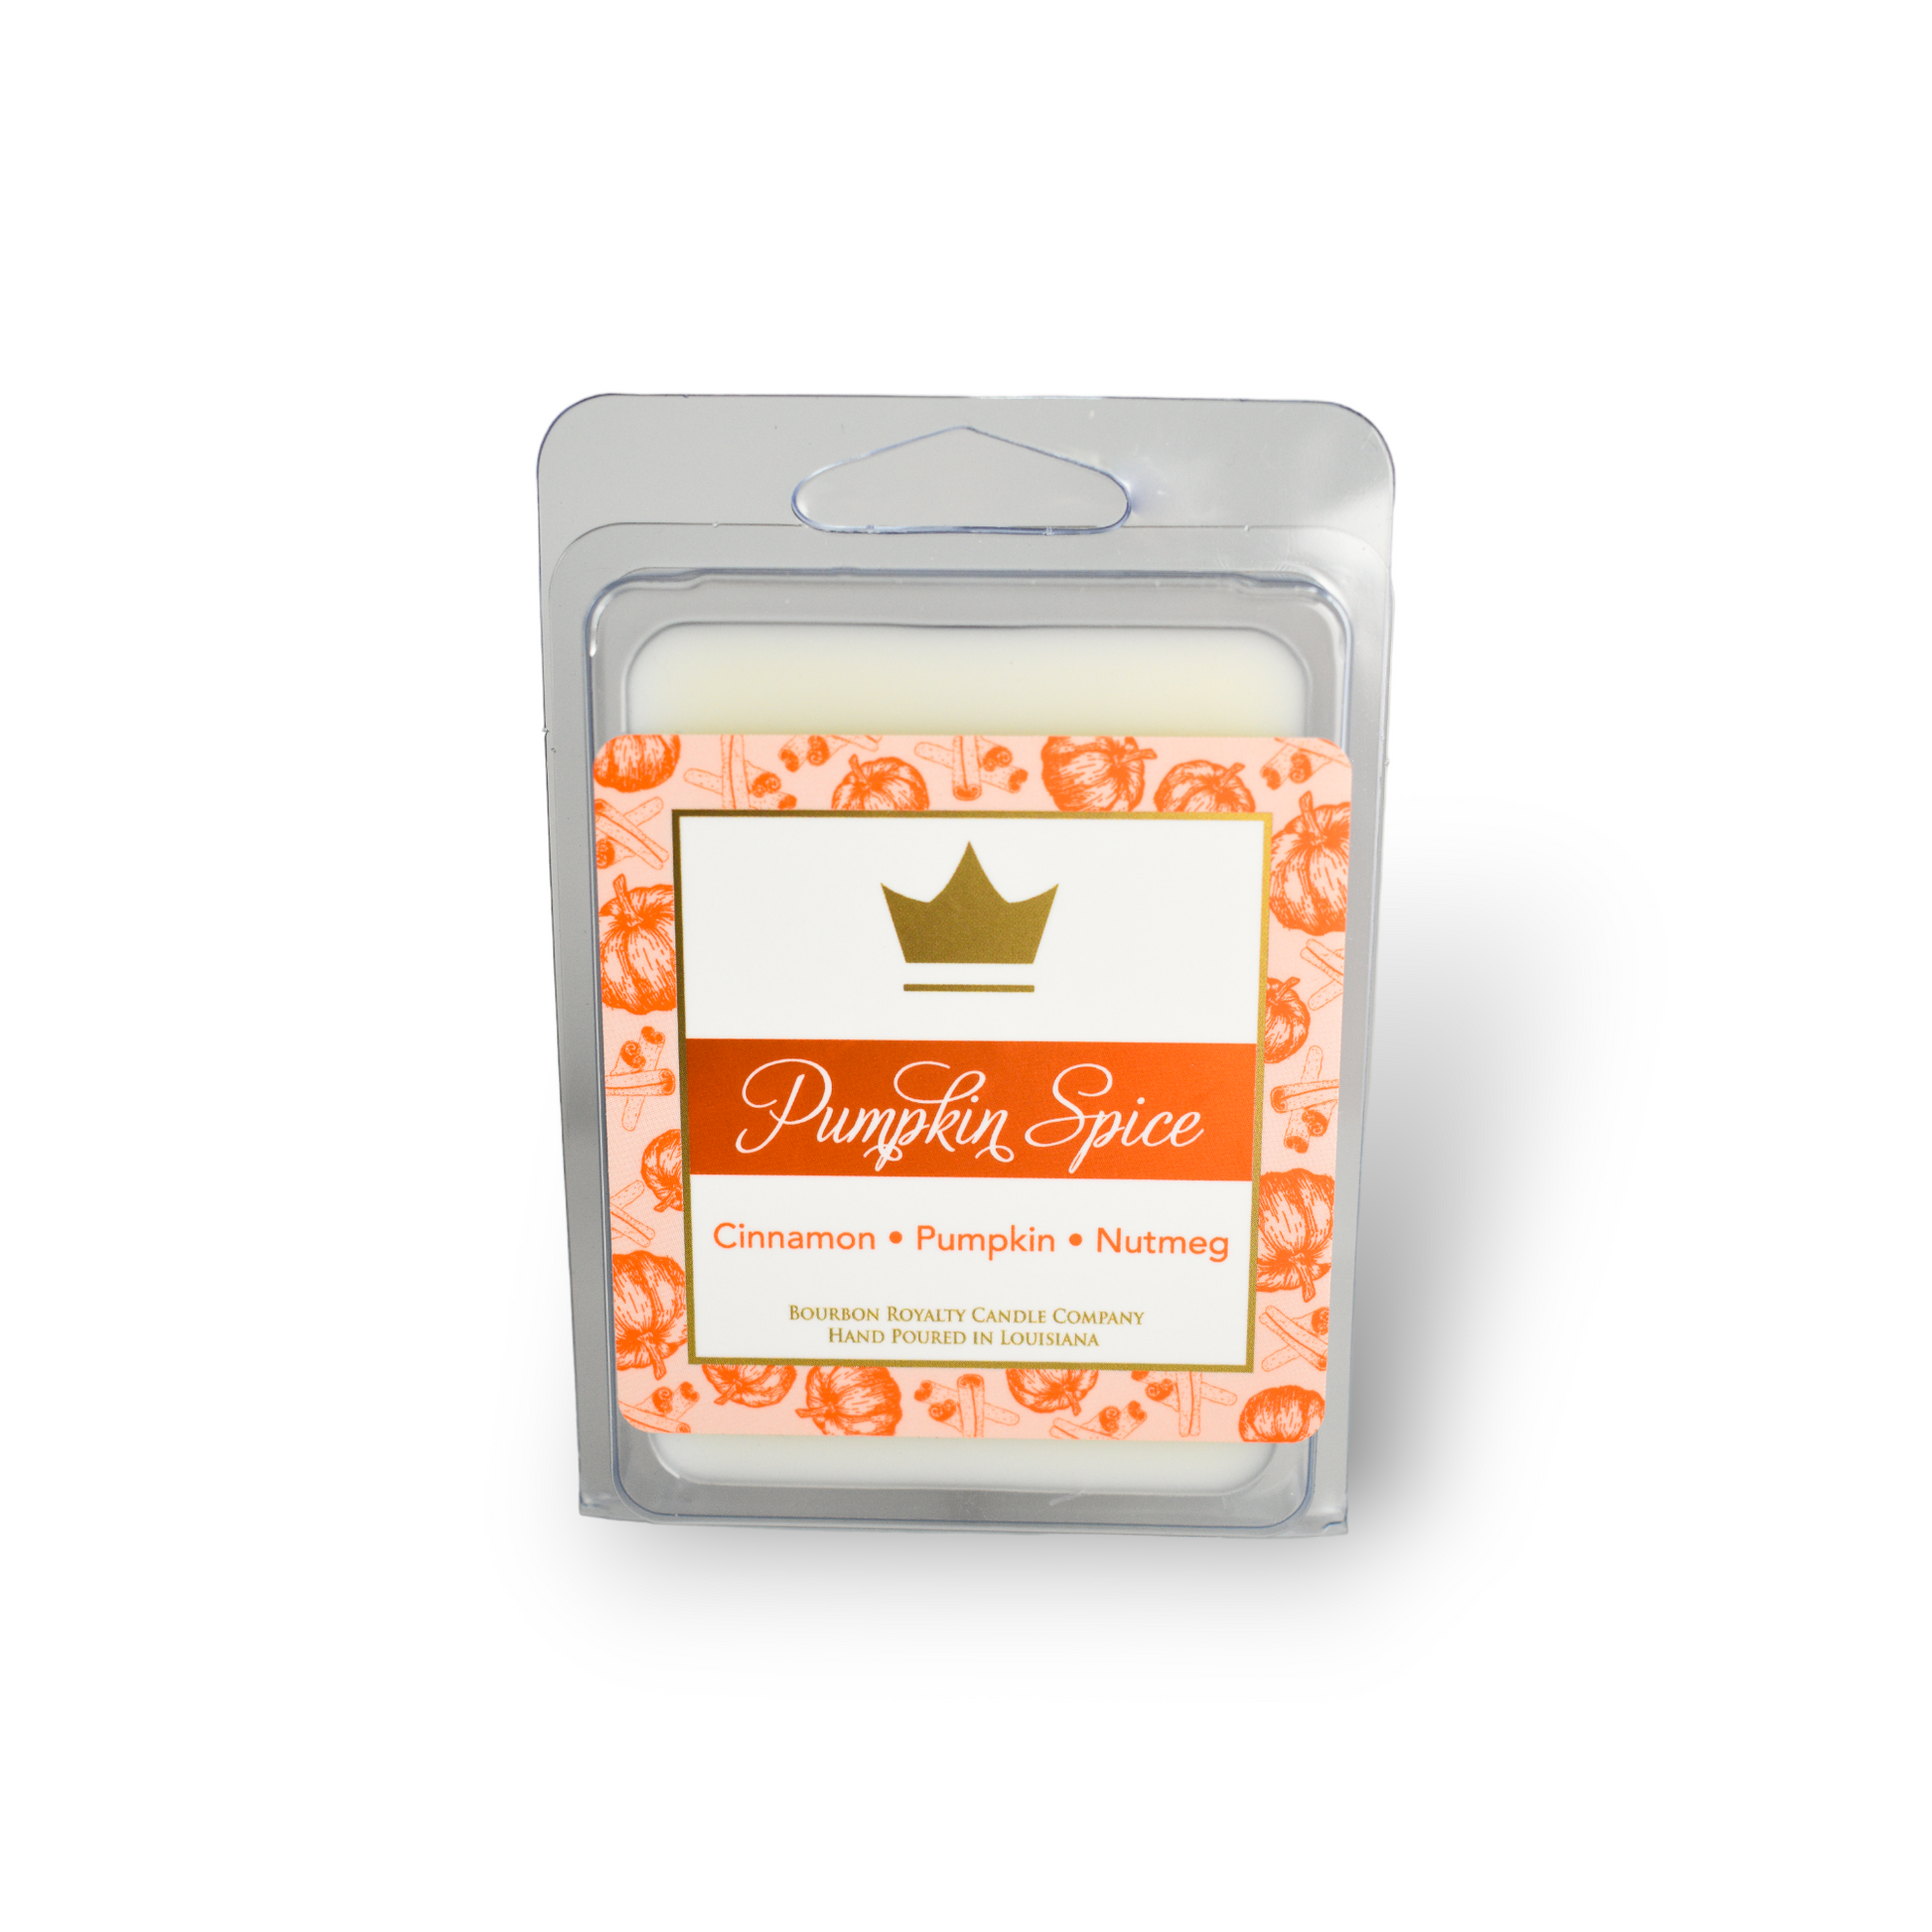 Cinnamon and Maple Bourbon Wax Melts – Candles and Creams